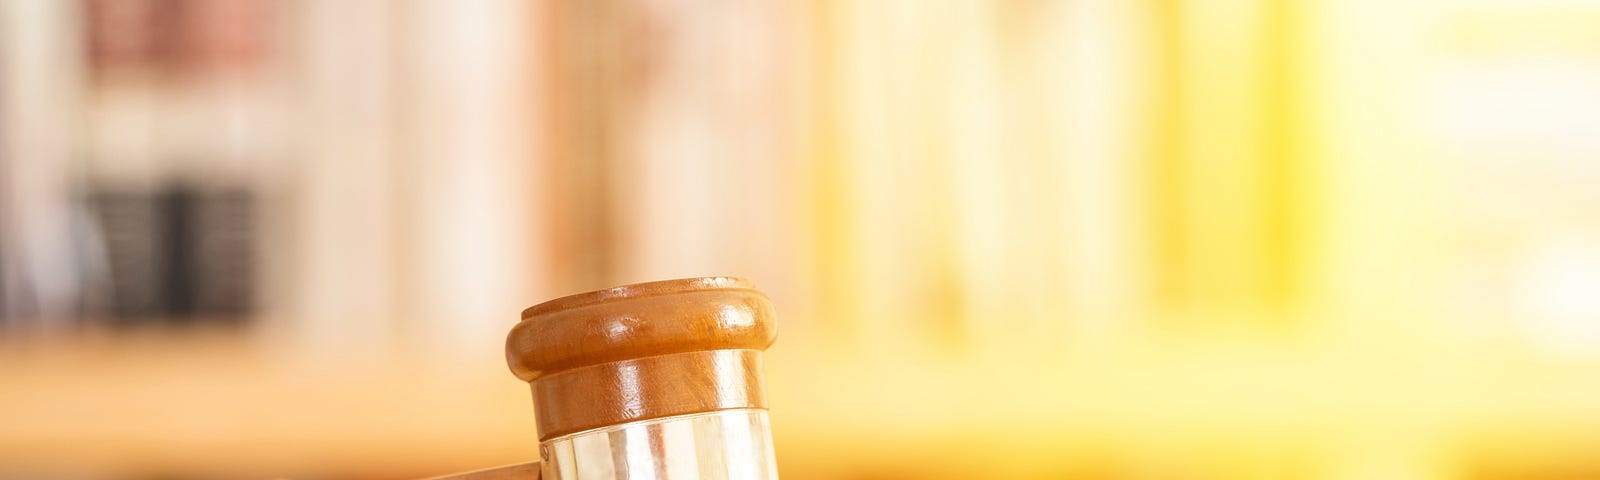 A photo of a wooden gavel in front of a bookshelf